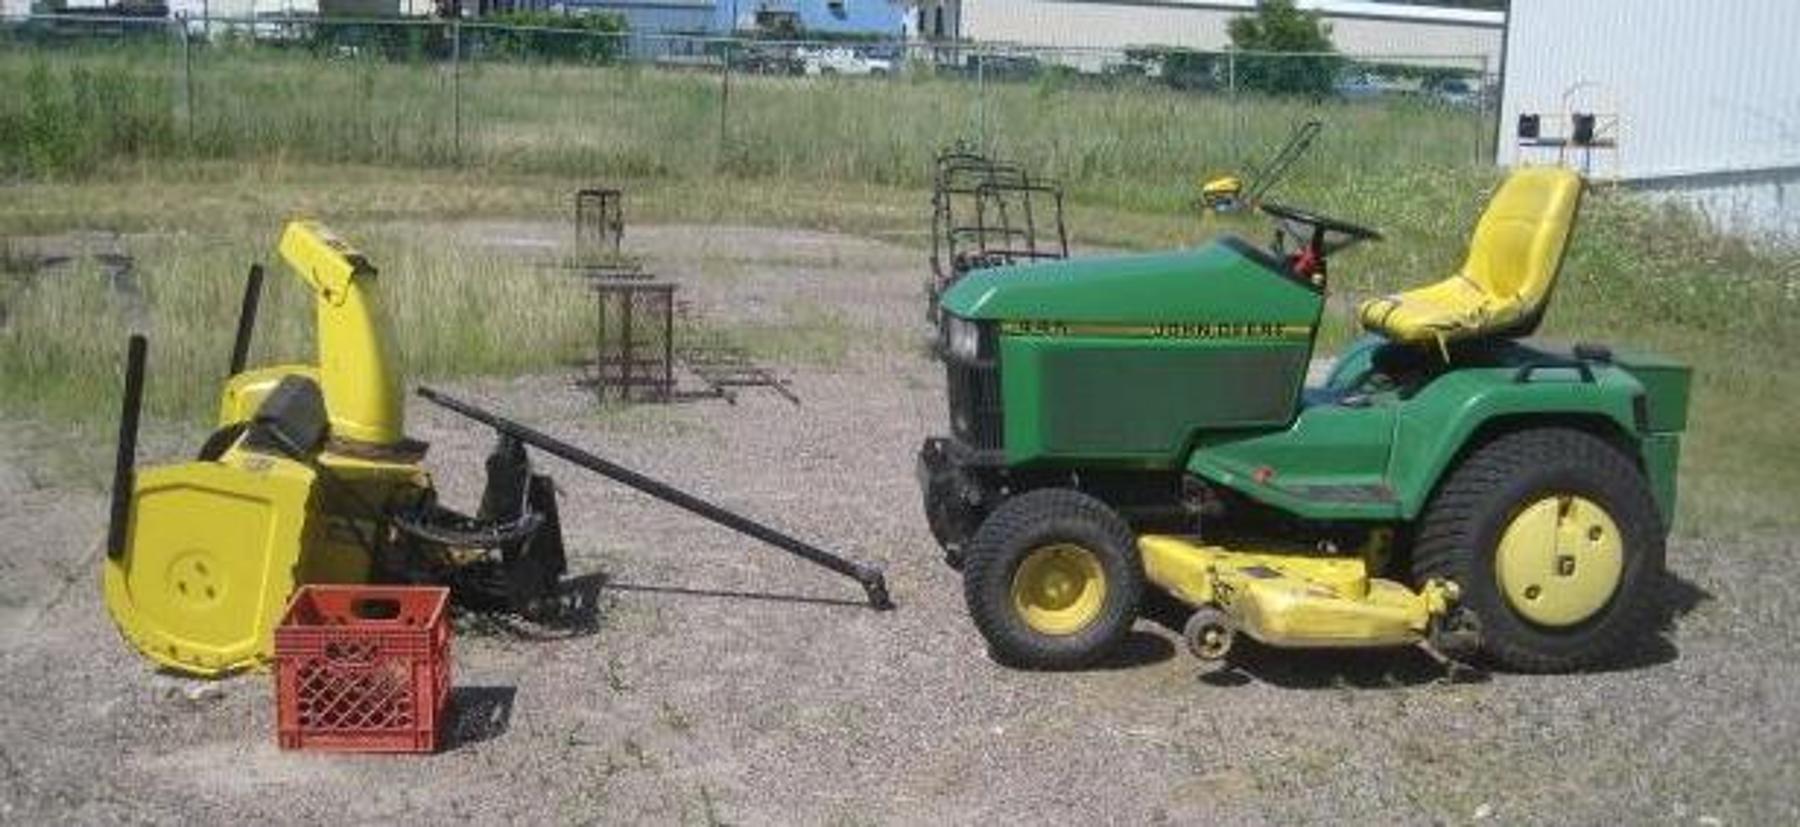 John Deere 445, Furniture, Lawn and Garden, Tools, Household and More